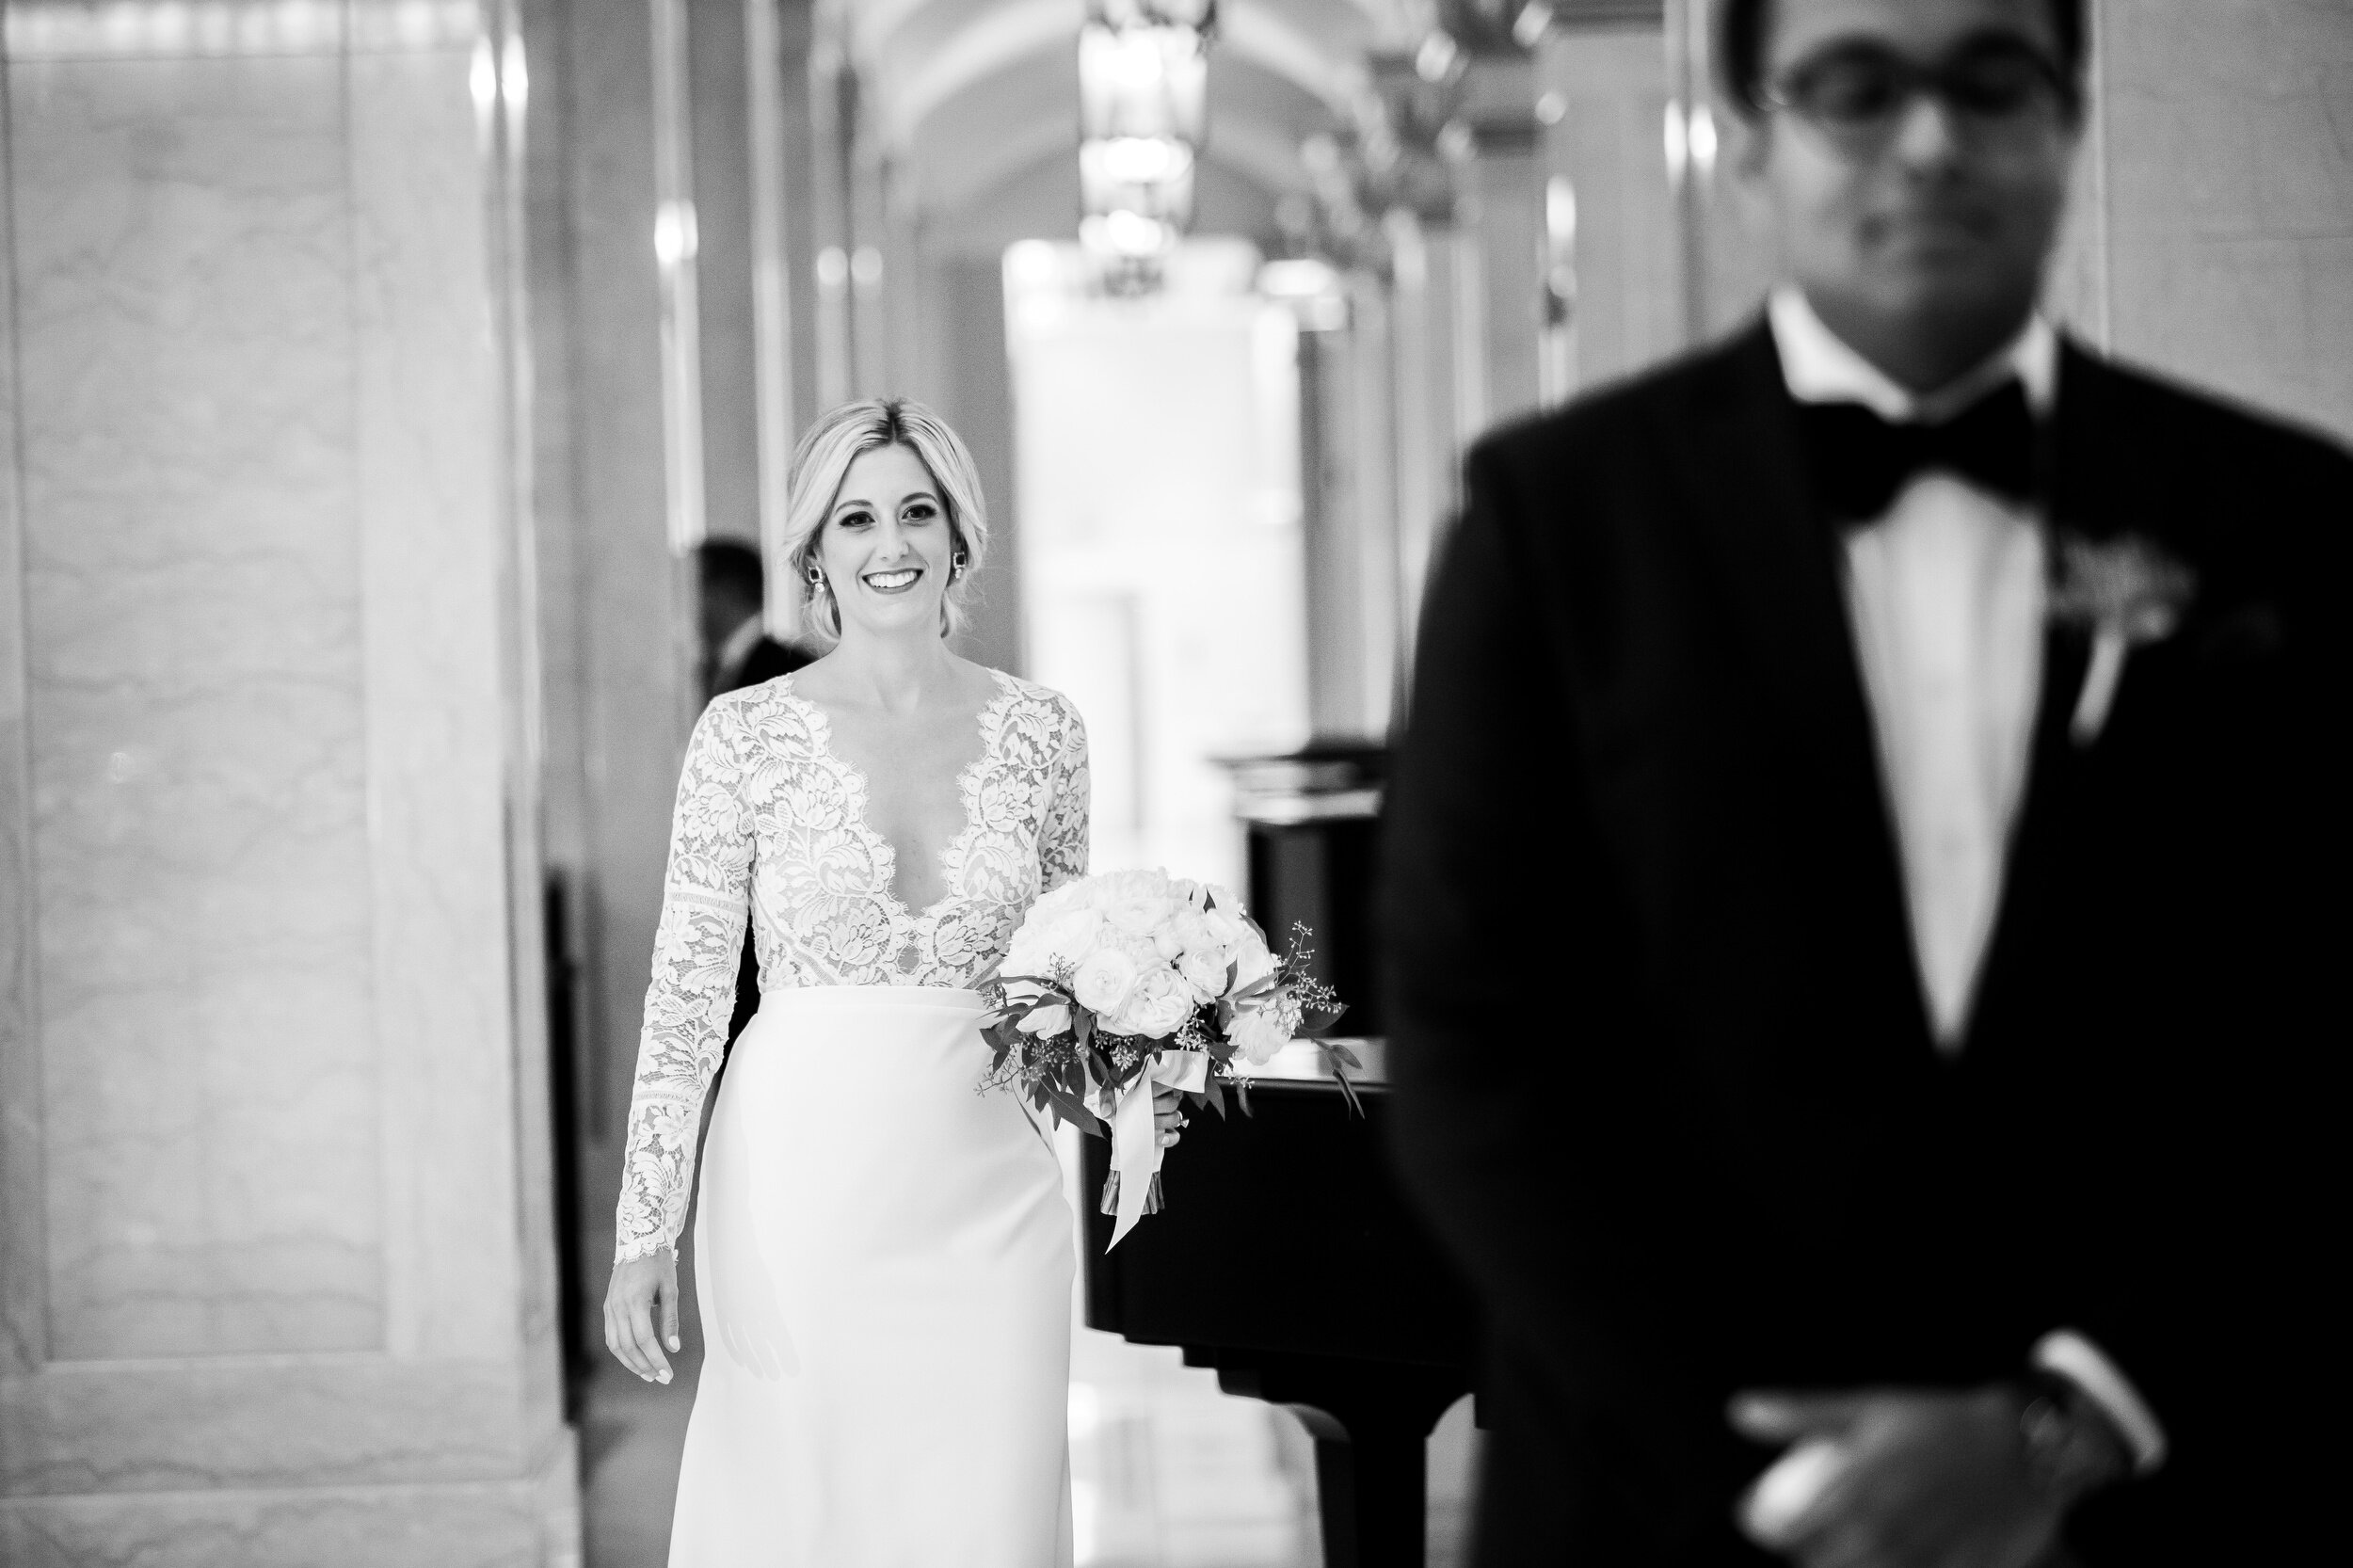 Bride and groom first look: Geraghty Chicago wedding photography captured by J. Brown Photography.